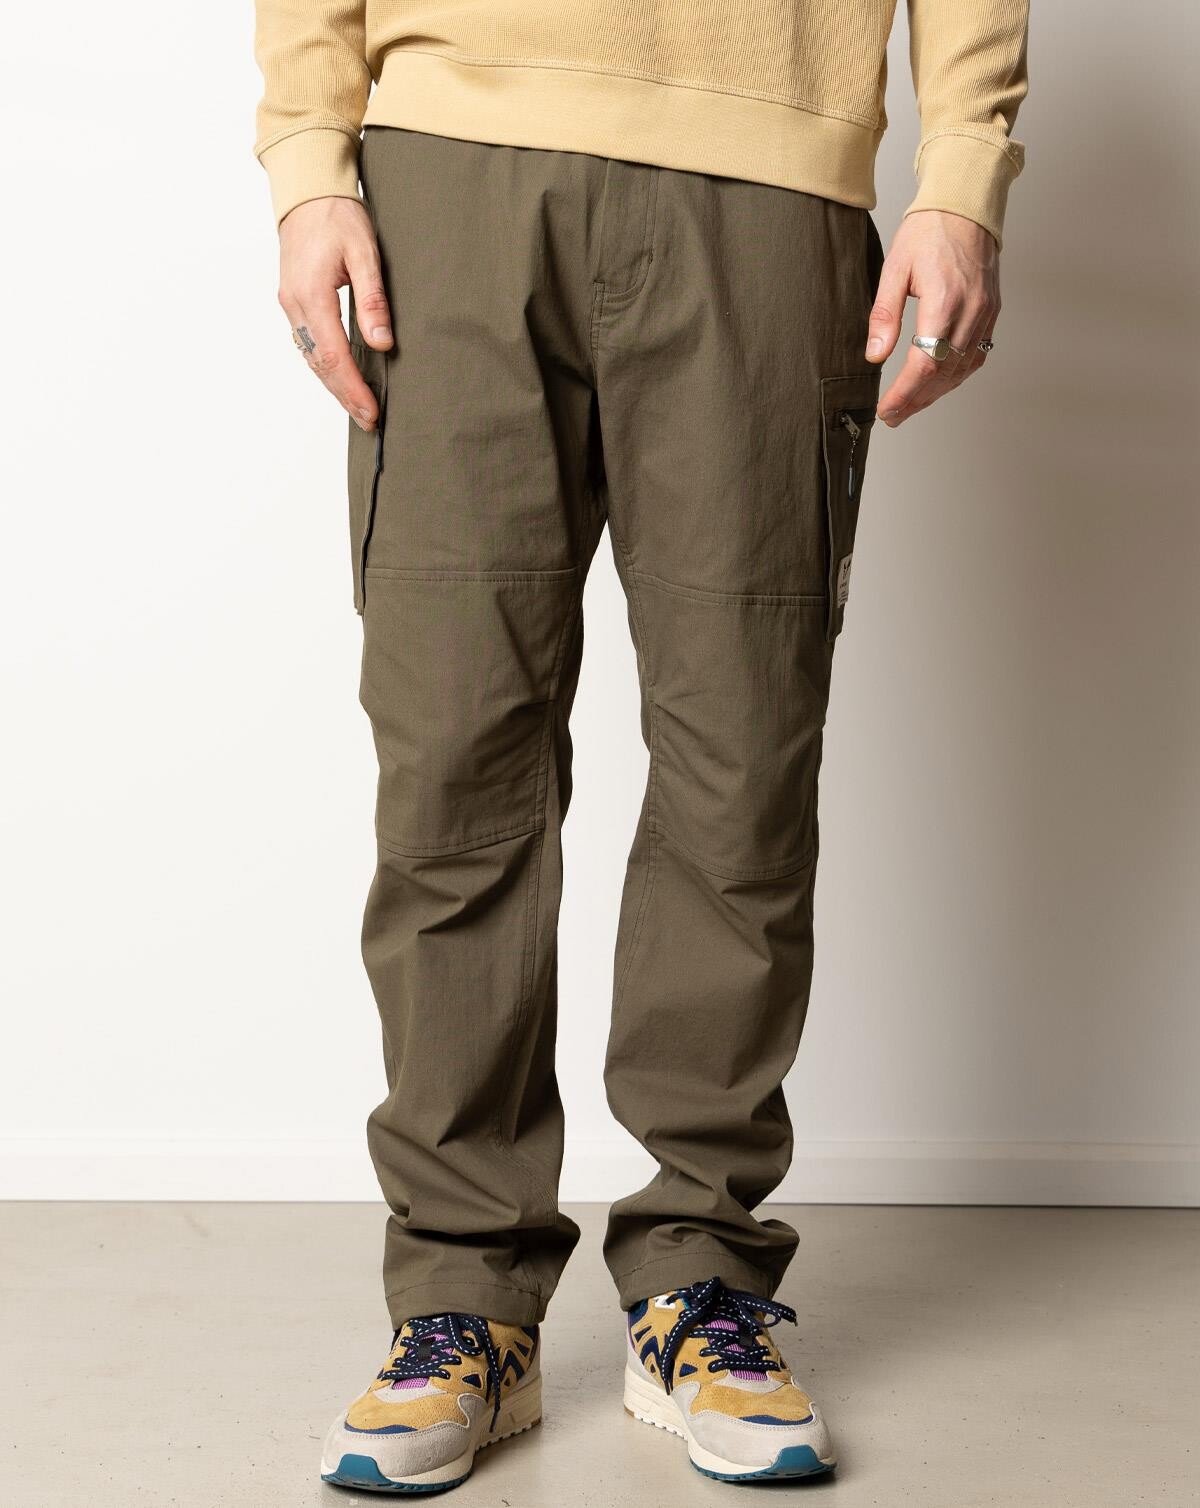 15: Fat Moose Pavement Ripstop Bukser (Army Green, S)